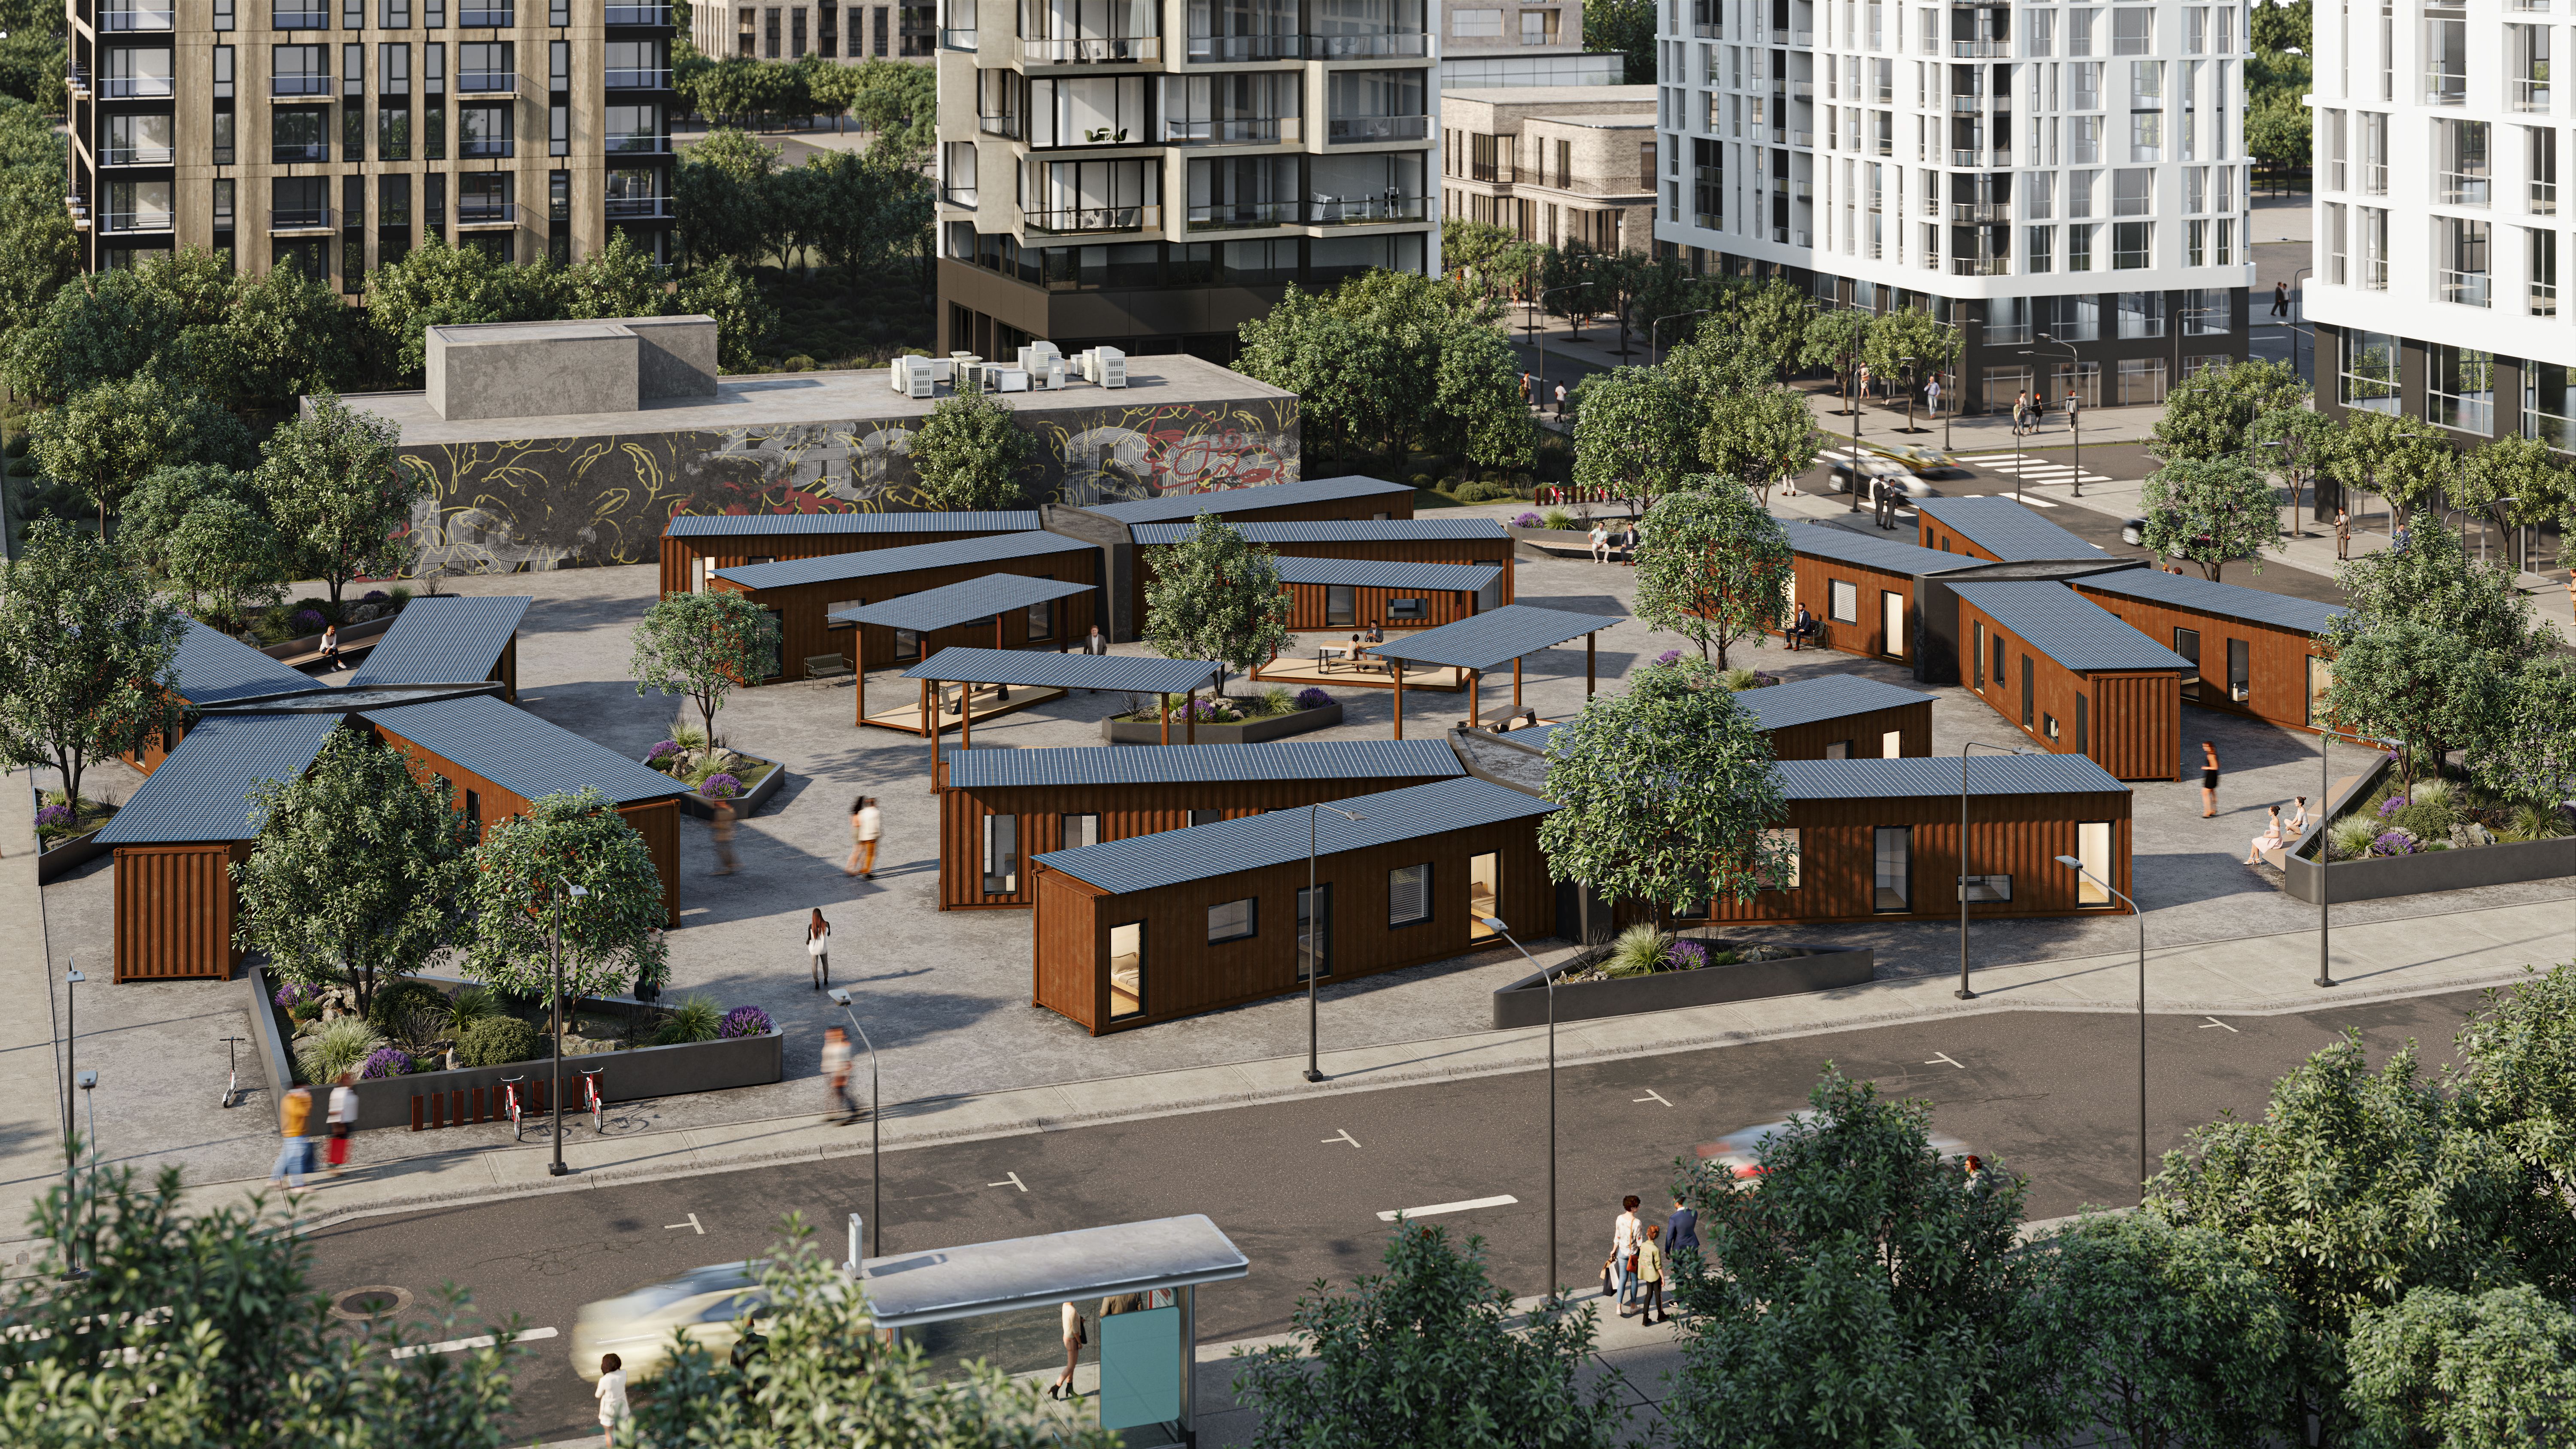 Shipping containers turned into housing. 